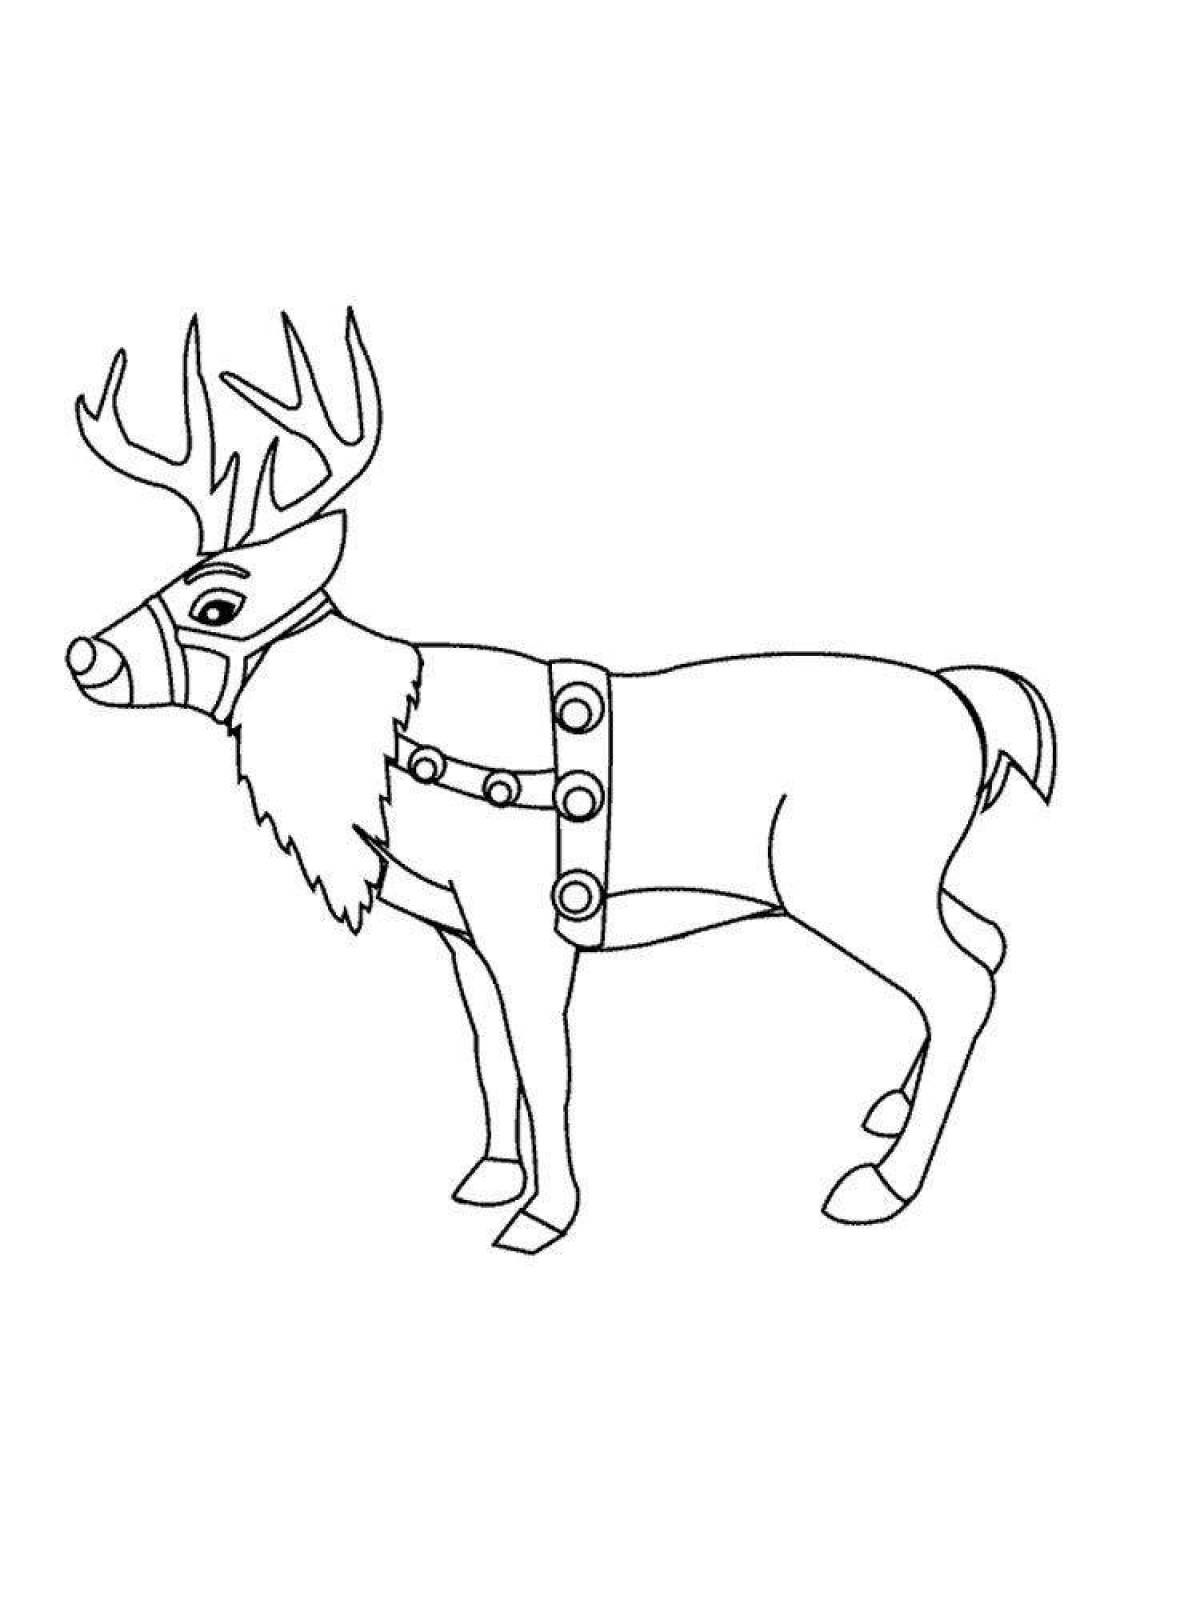 Colorful deer coloring pages for kids